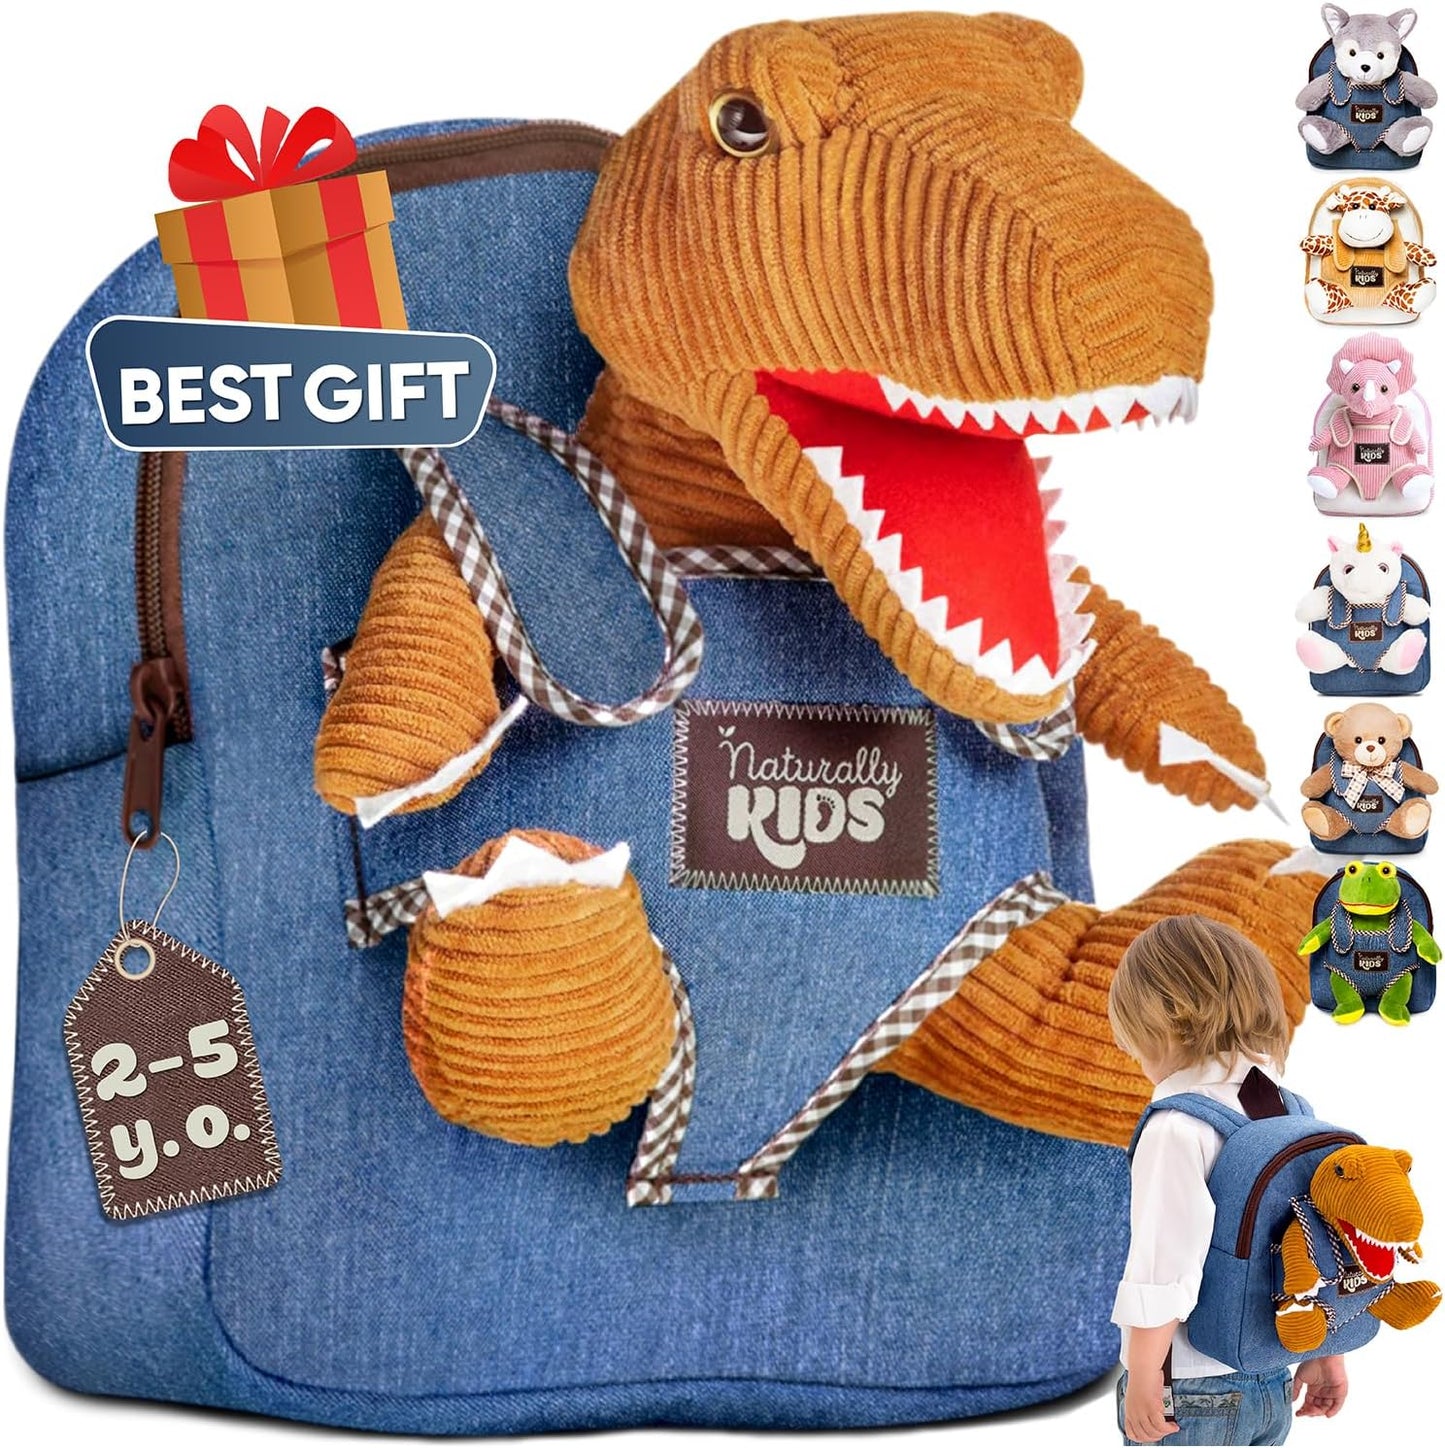 Dinosaur Toys for Kids 3-5, Toddler Toys for Ages 2-4, Dinosaur Backpack, 2 Year Old Boy Birthday Gift